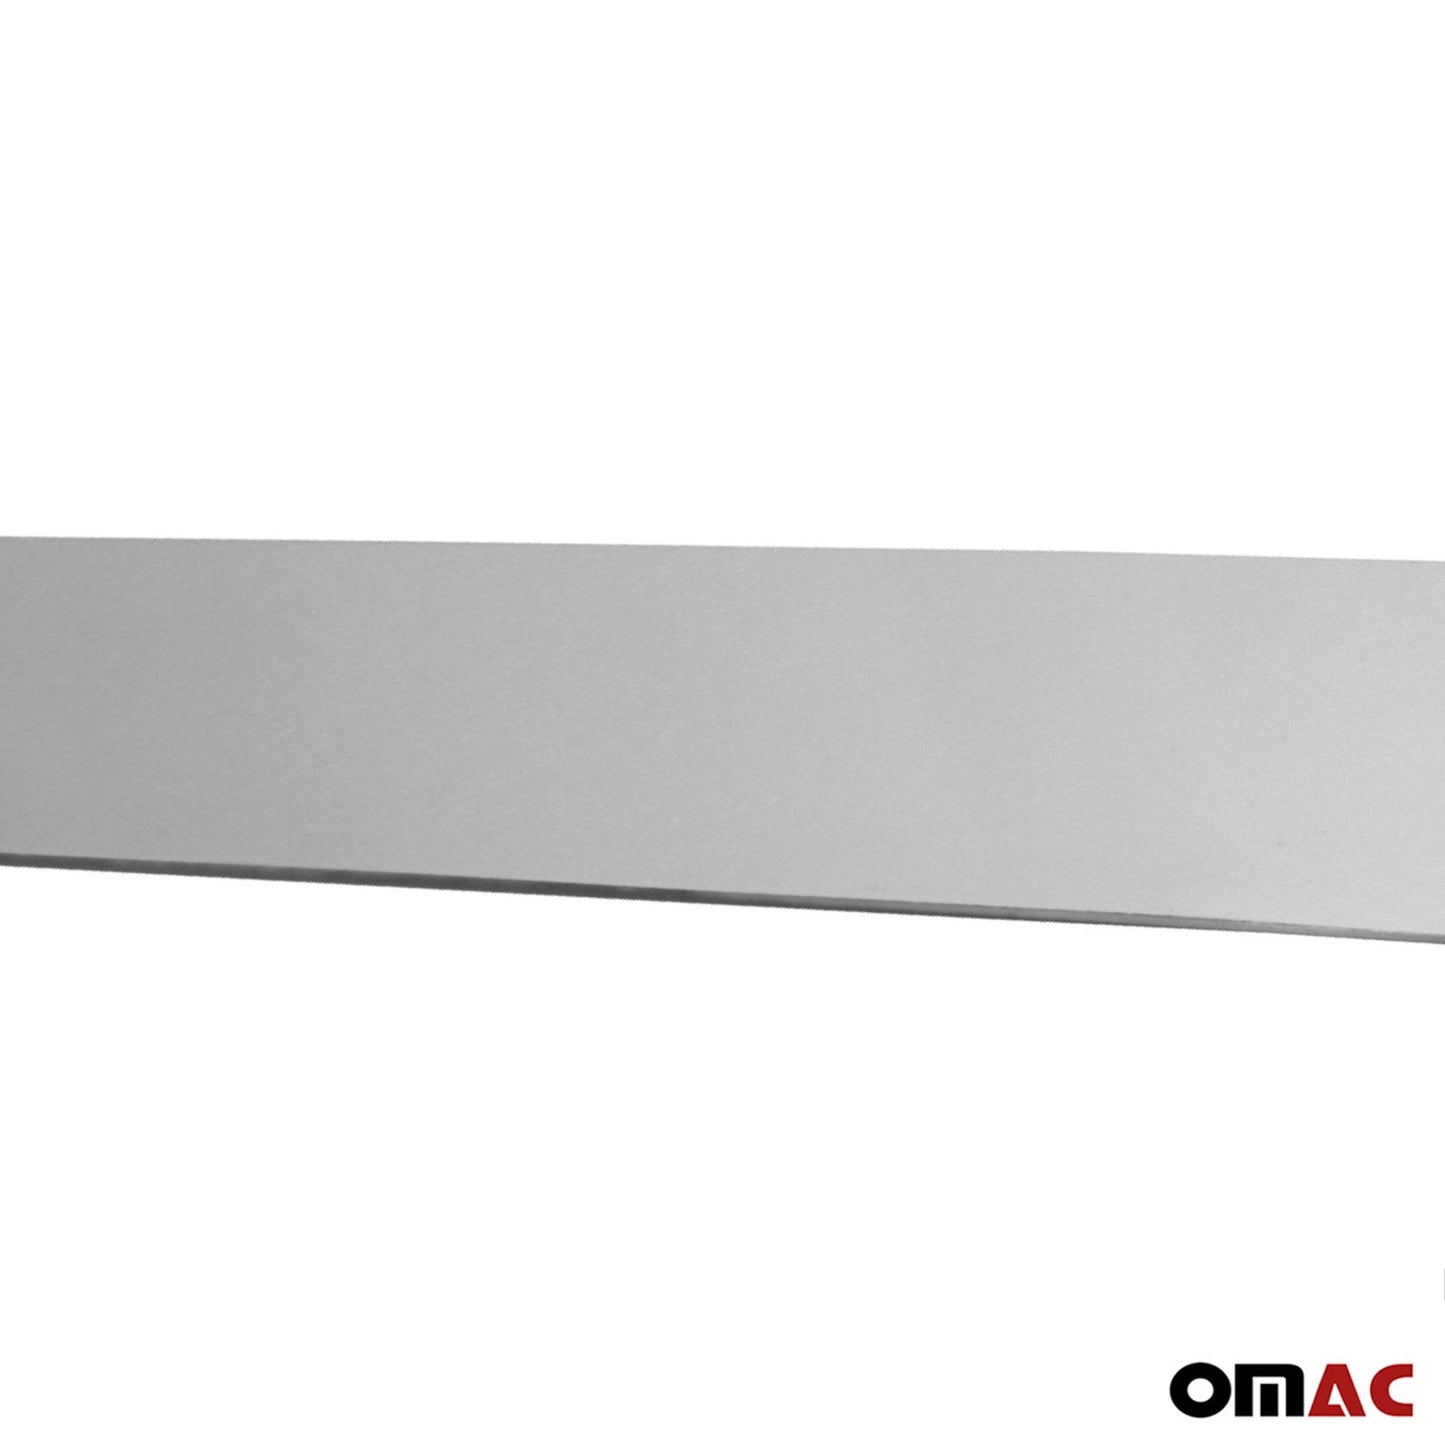 OMAC Rear Trunk Molding Trim for Land Rover Range Rover Sport 2014-2022 Steel Silver LC-6012052